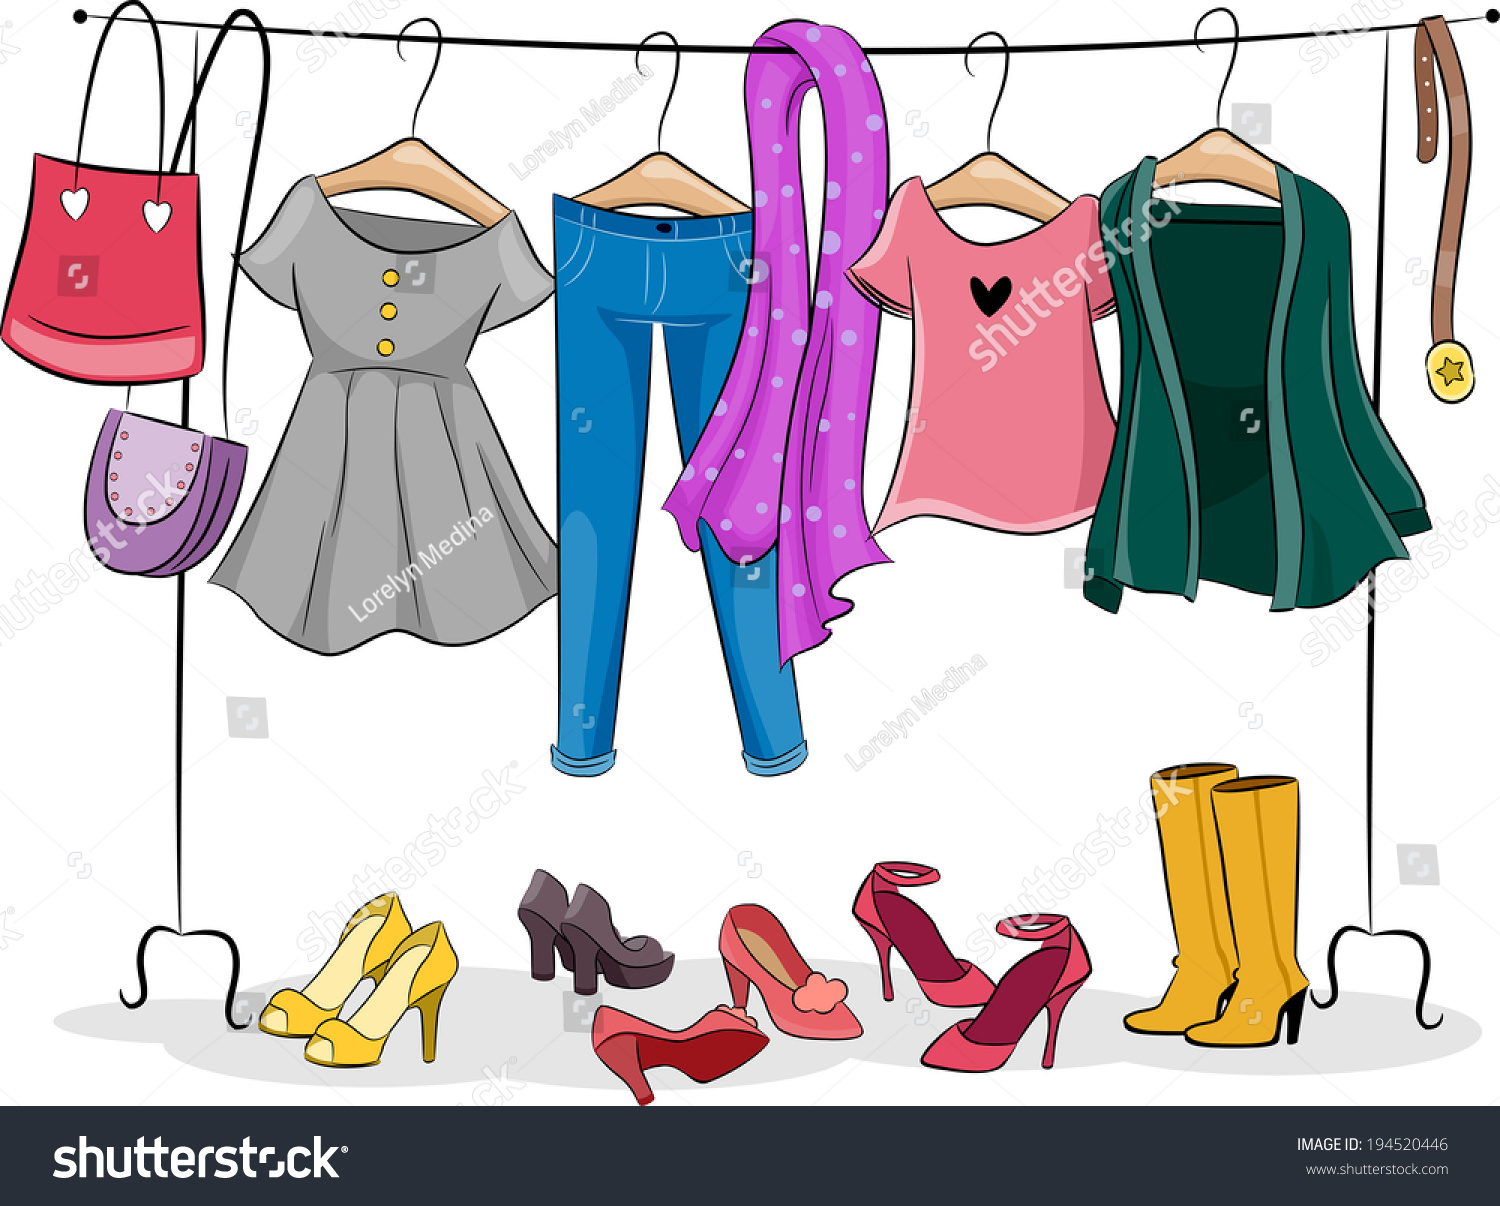 free clipart clothes rack - photo #7